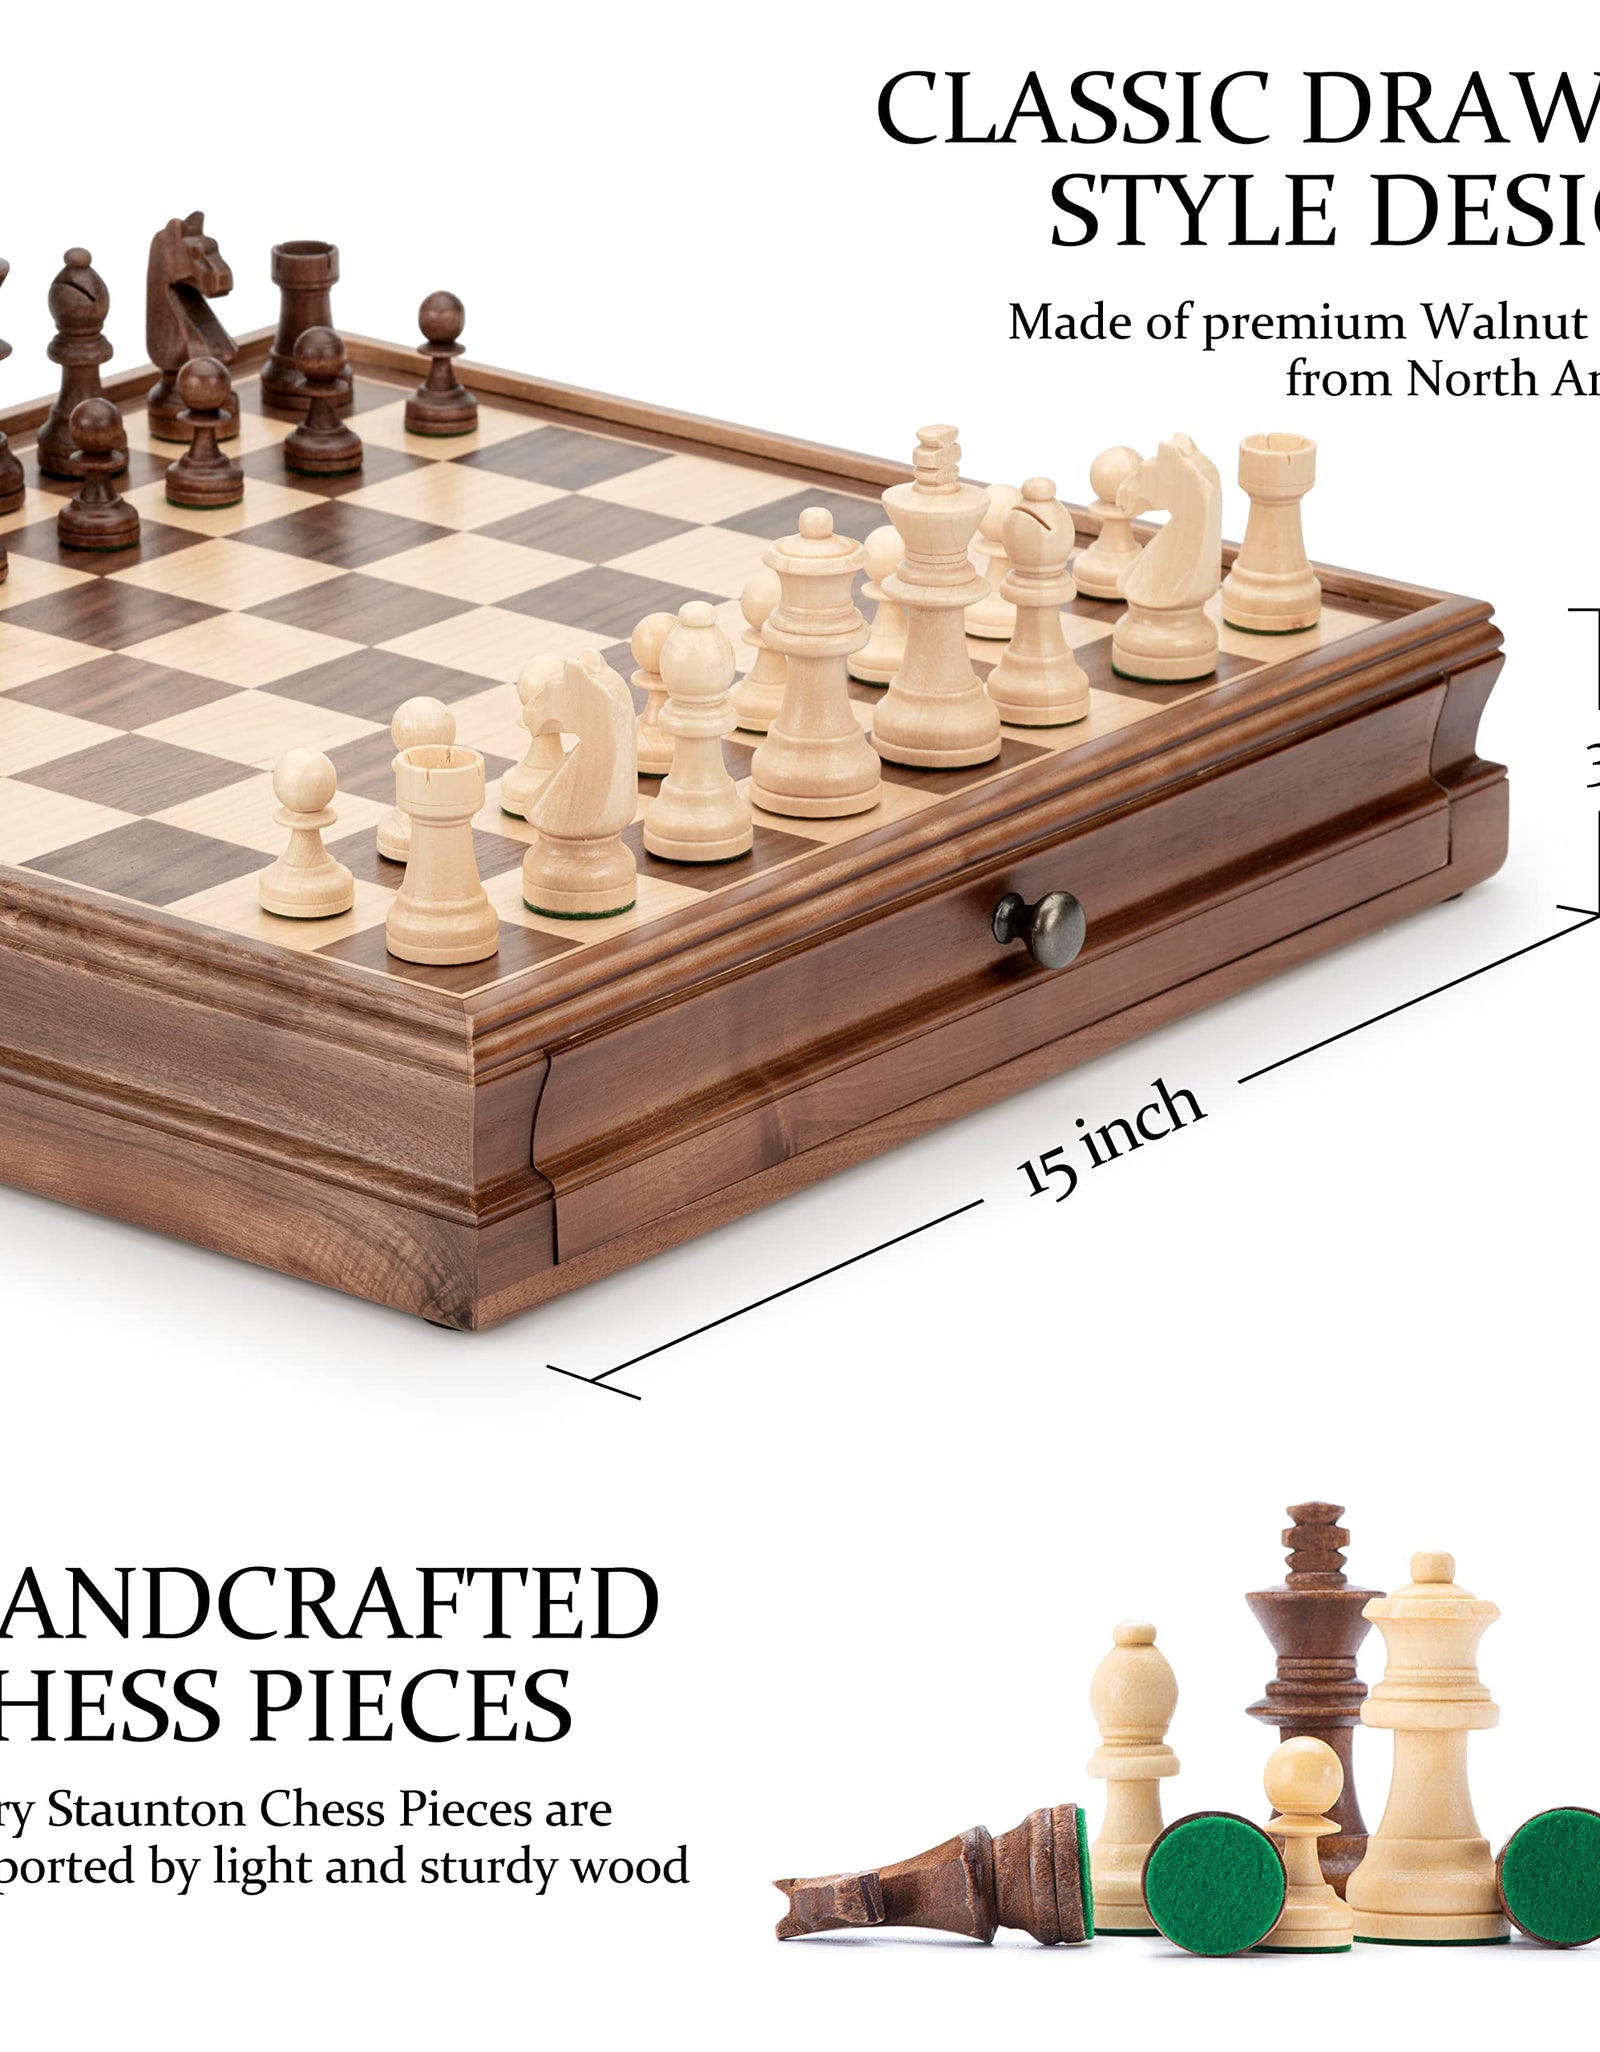 A&A 15" WOODEN CHESS & CHECKERS / Storage Drawer / 3" King Height German Knight Staunton Chess Pieces / Walnut Box w/Walnut & Maple Inlay / 2 Extra Queen / Classic 2 in 1 Board Games